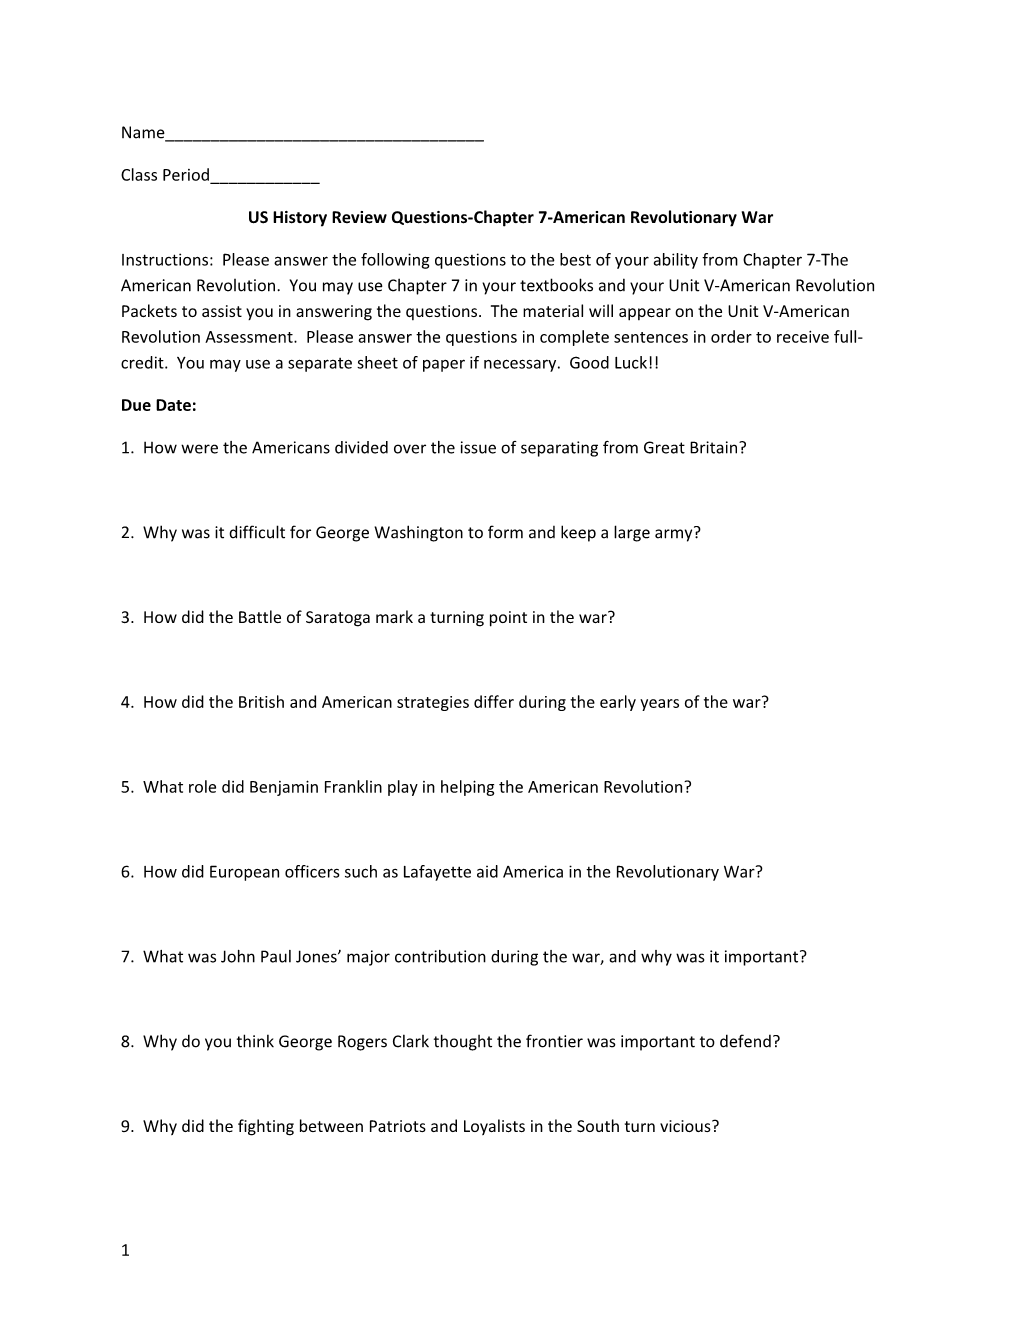 US History Review Questions-Chapter 7-American Revolutionary War